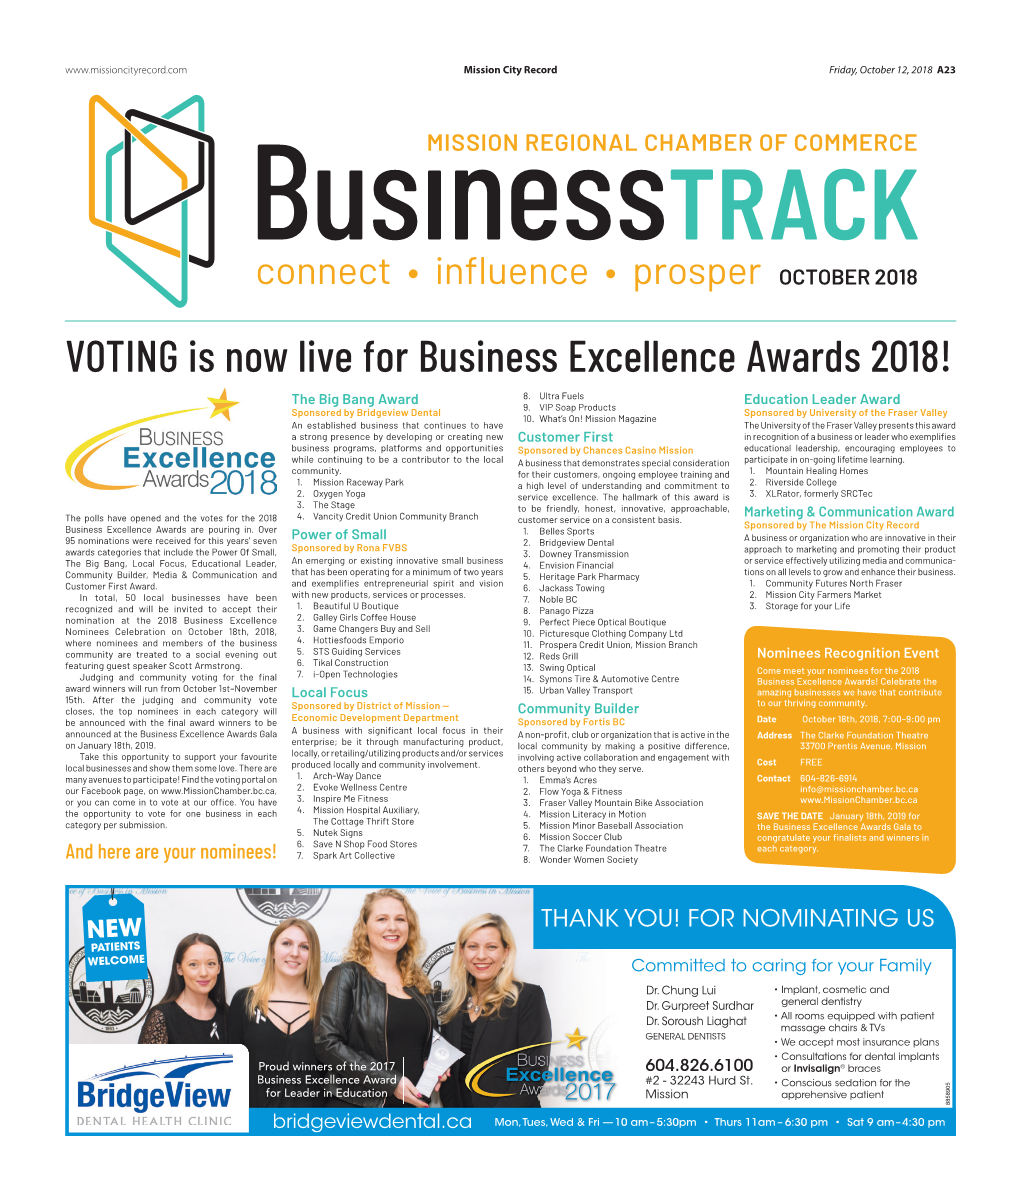 VOTING Is Now Live for Business Excellence Awards 2018! the Big Bang Award 8